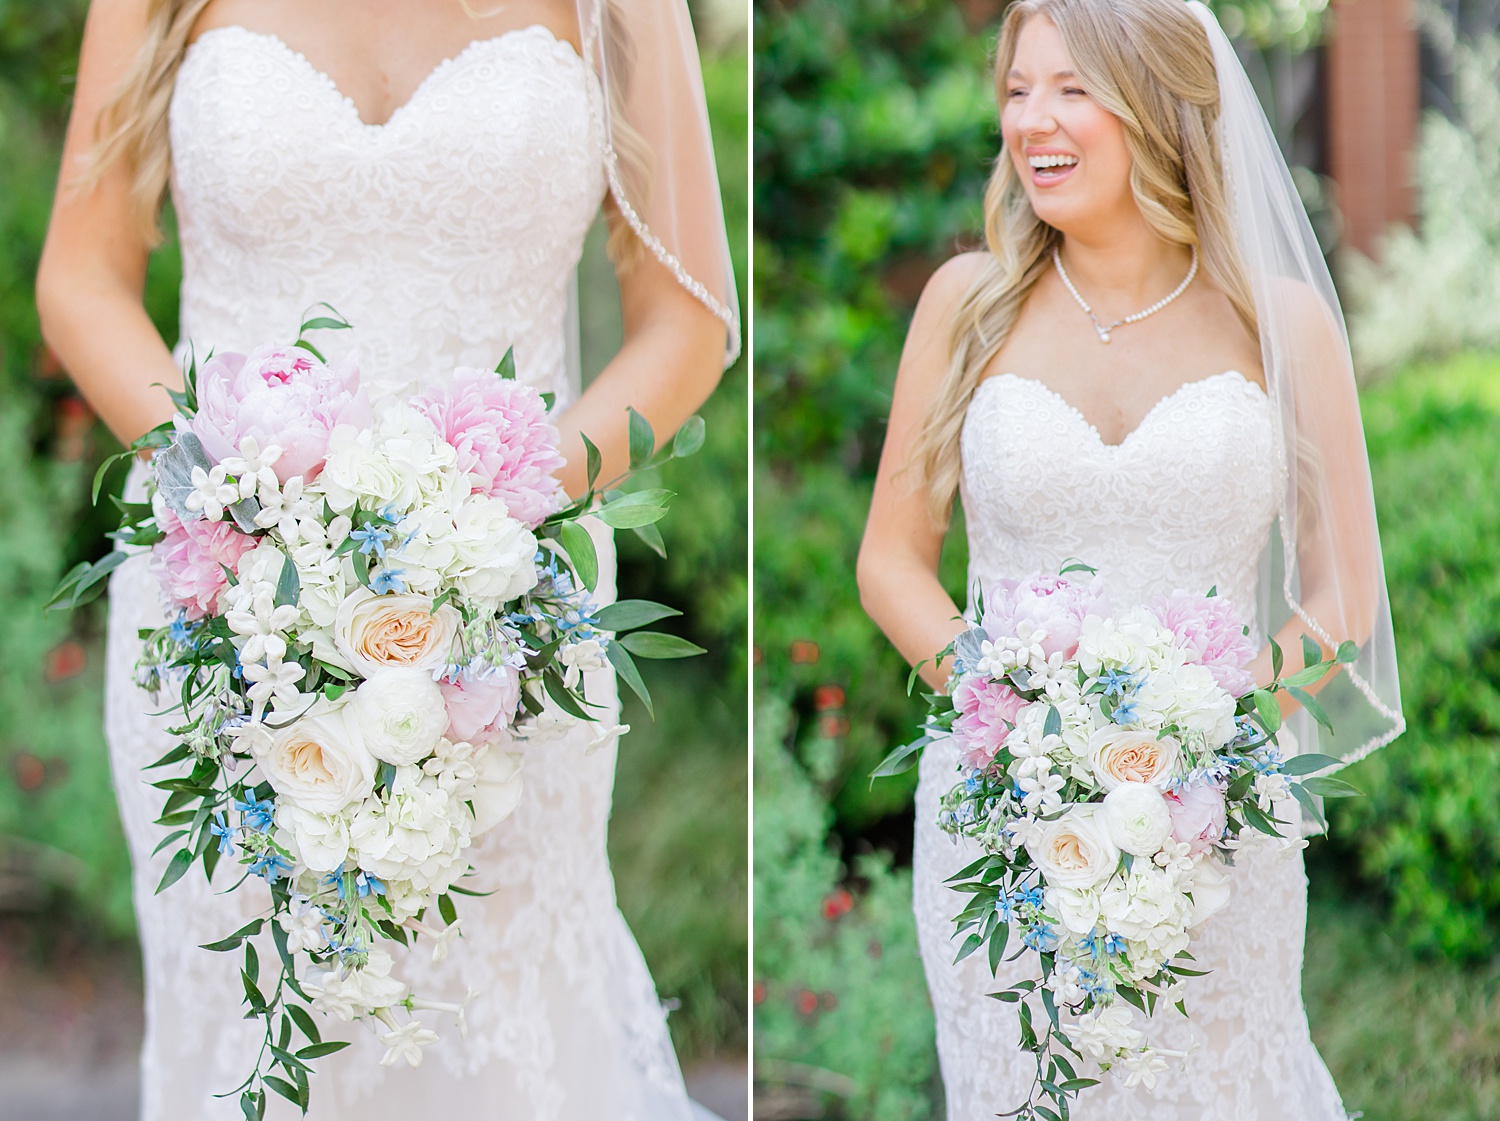 bride holding her gorgeous wedding bouquet featuring white flowers with pops of pink and blue